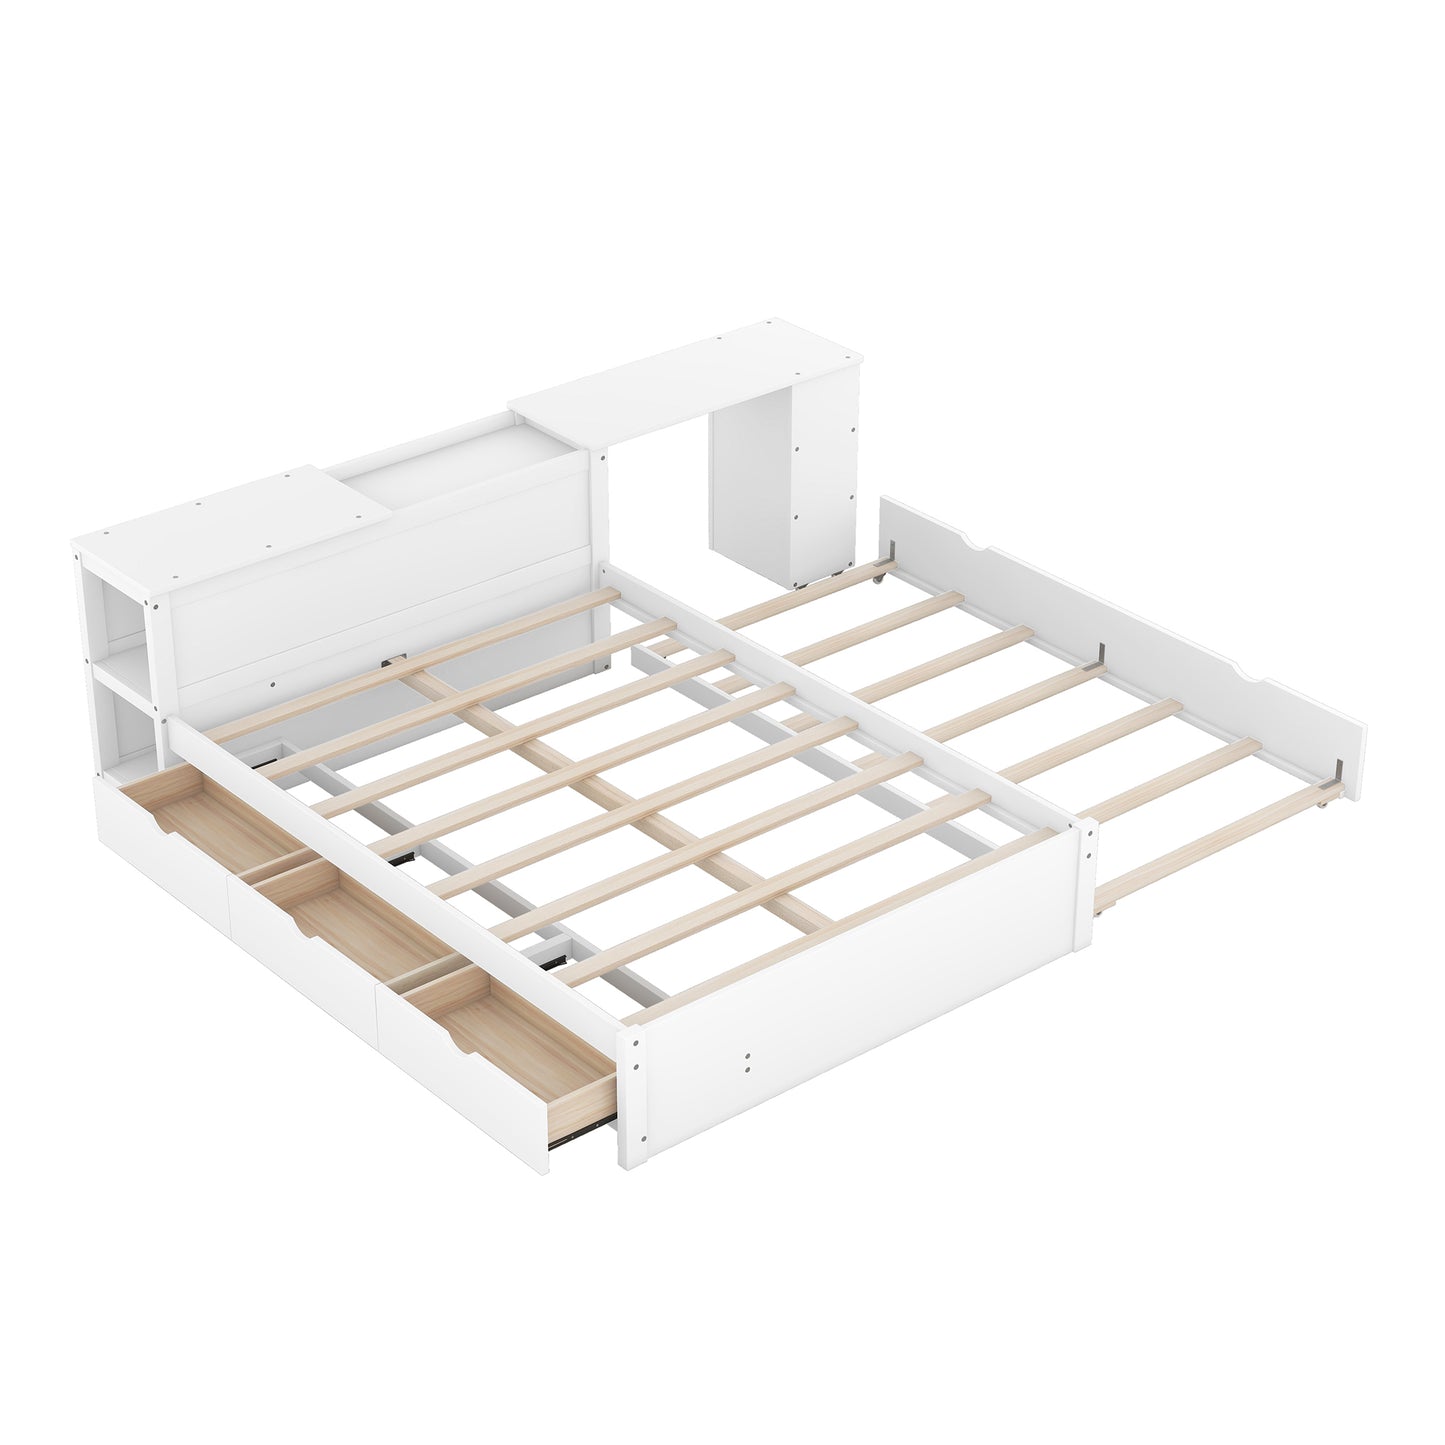 Full Size Platform Bed With a Rolling Shelf, White